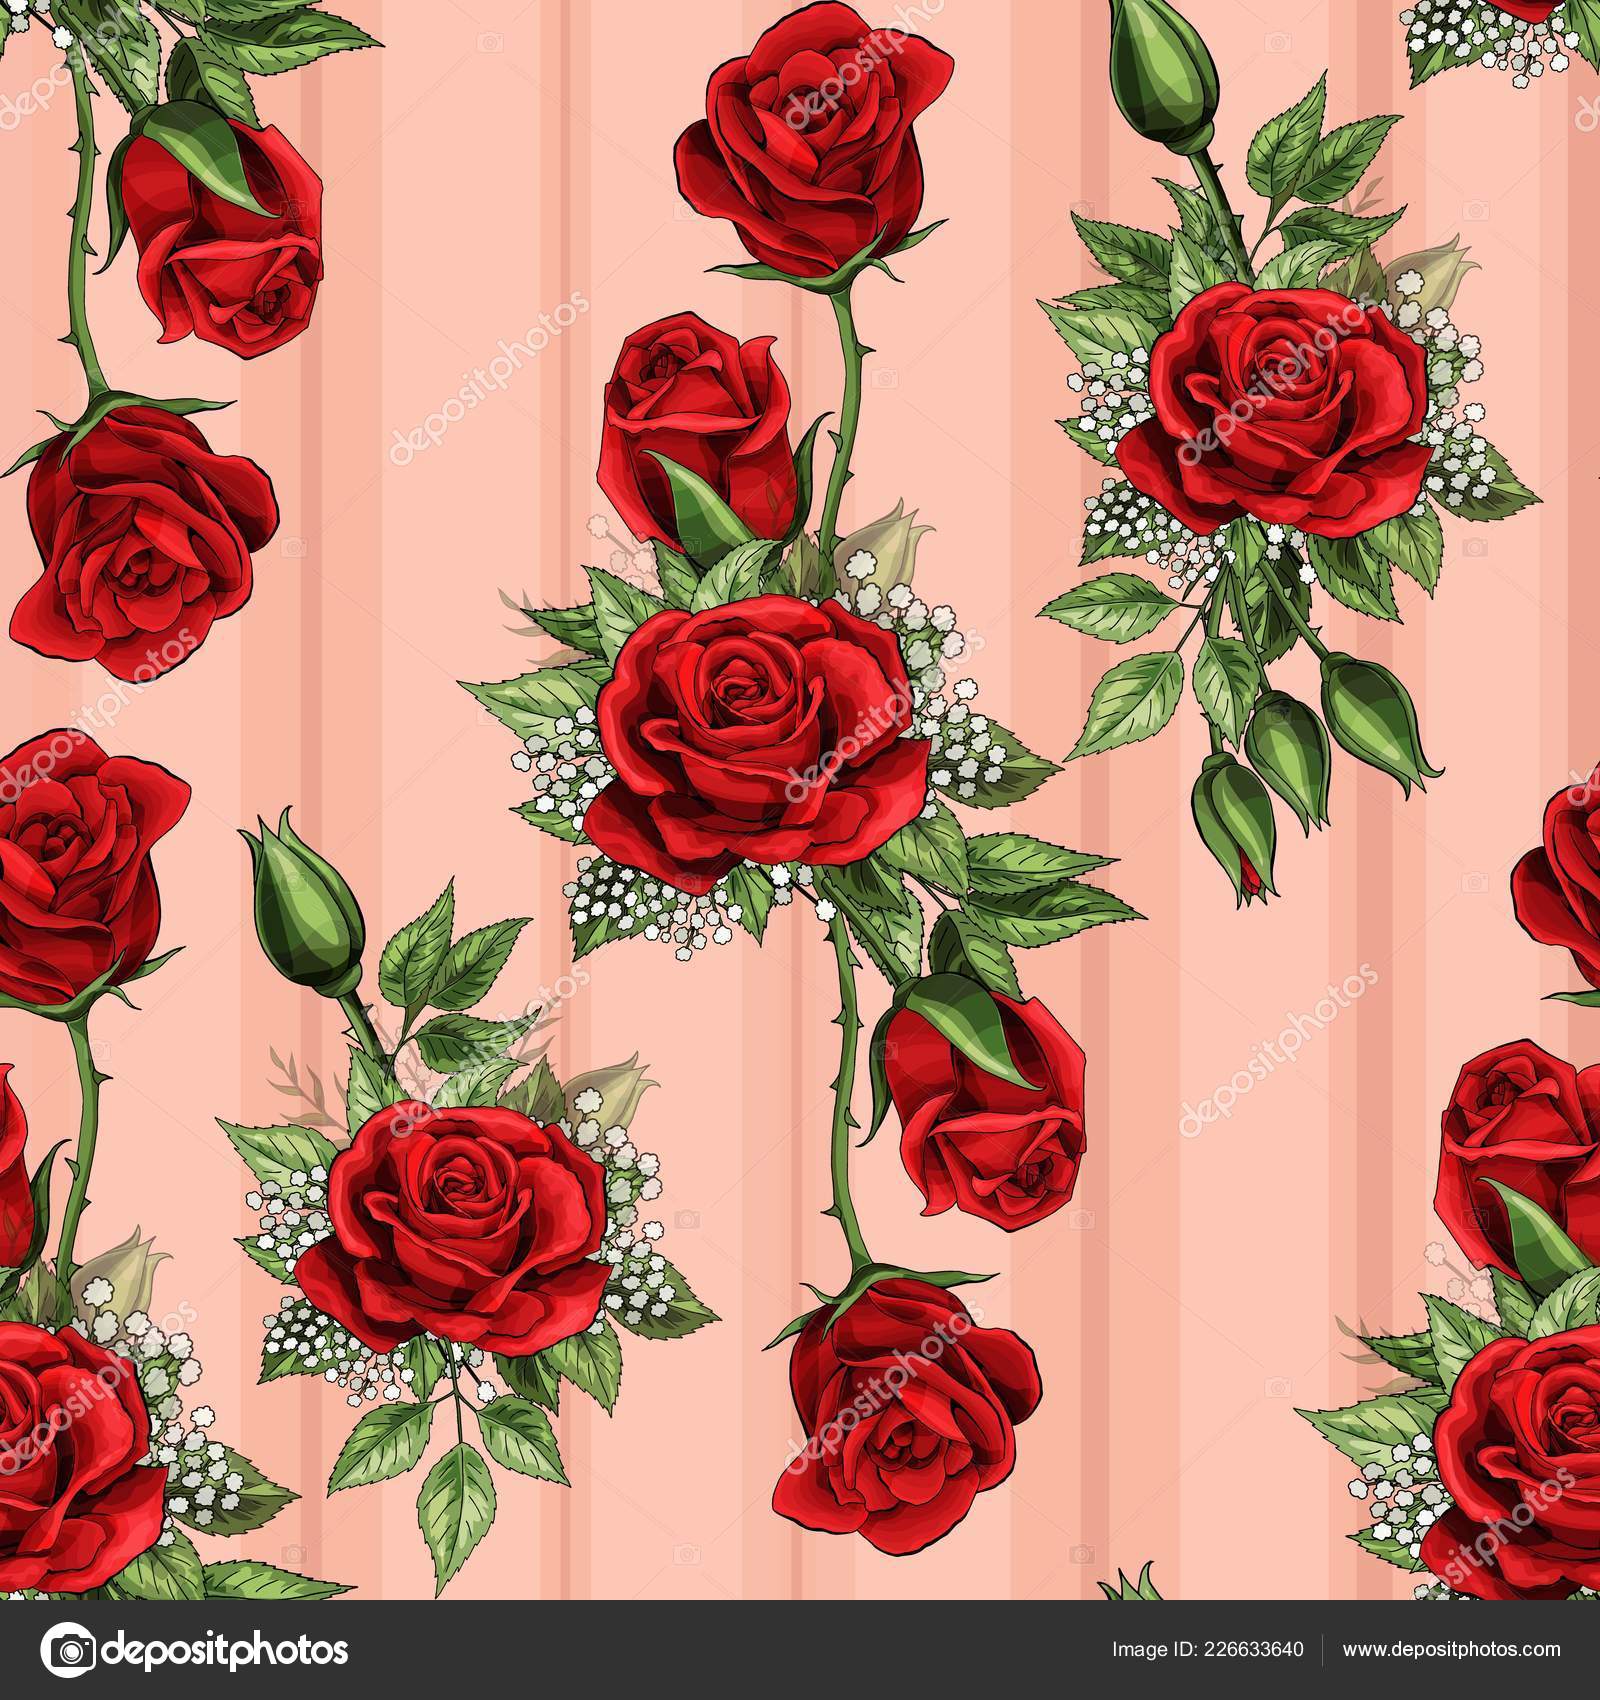 Red Rose Flower Bouquet Spreads Creeper Elements Seamless - Rose Red Rose Images Of Flowers , HD Wallpaper & Backgrounds